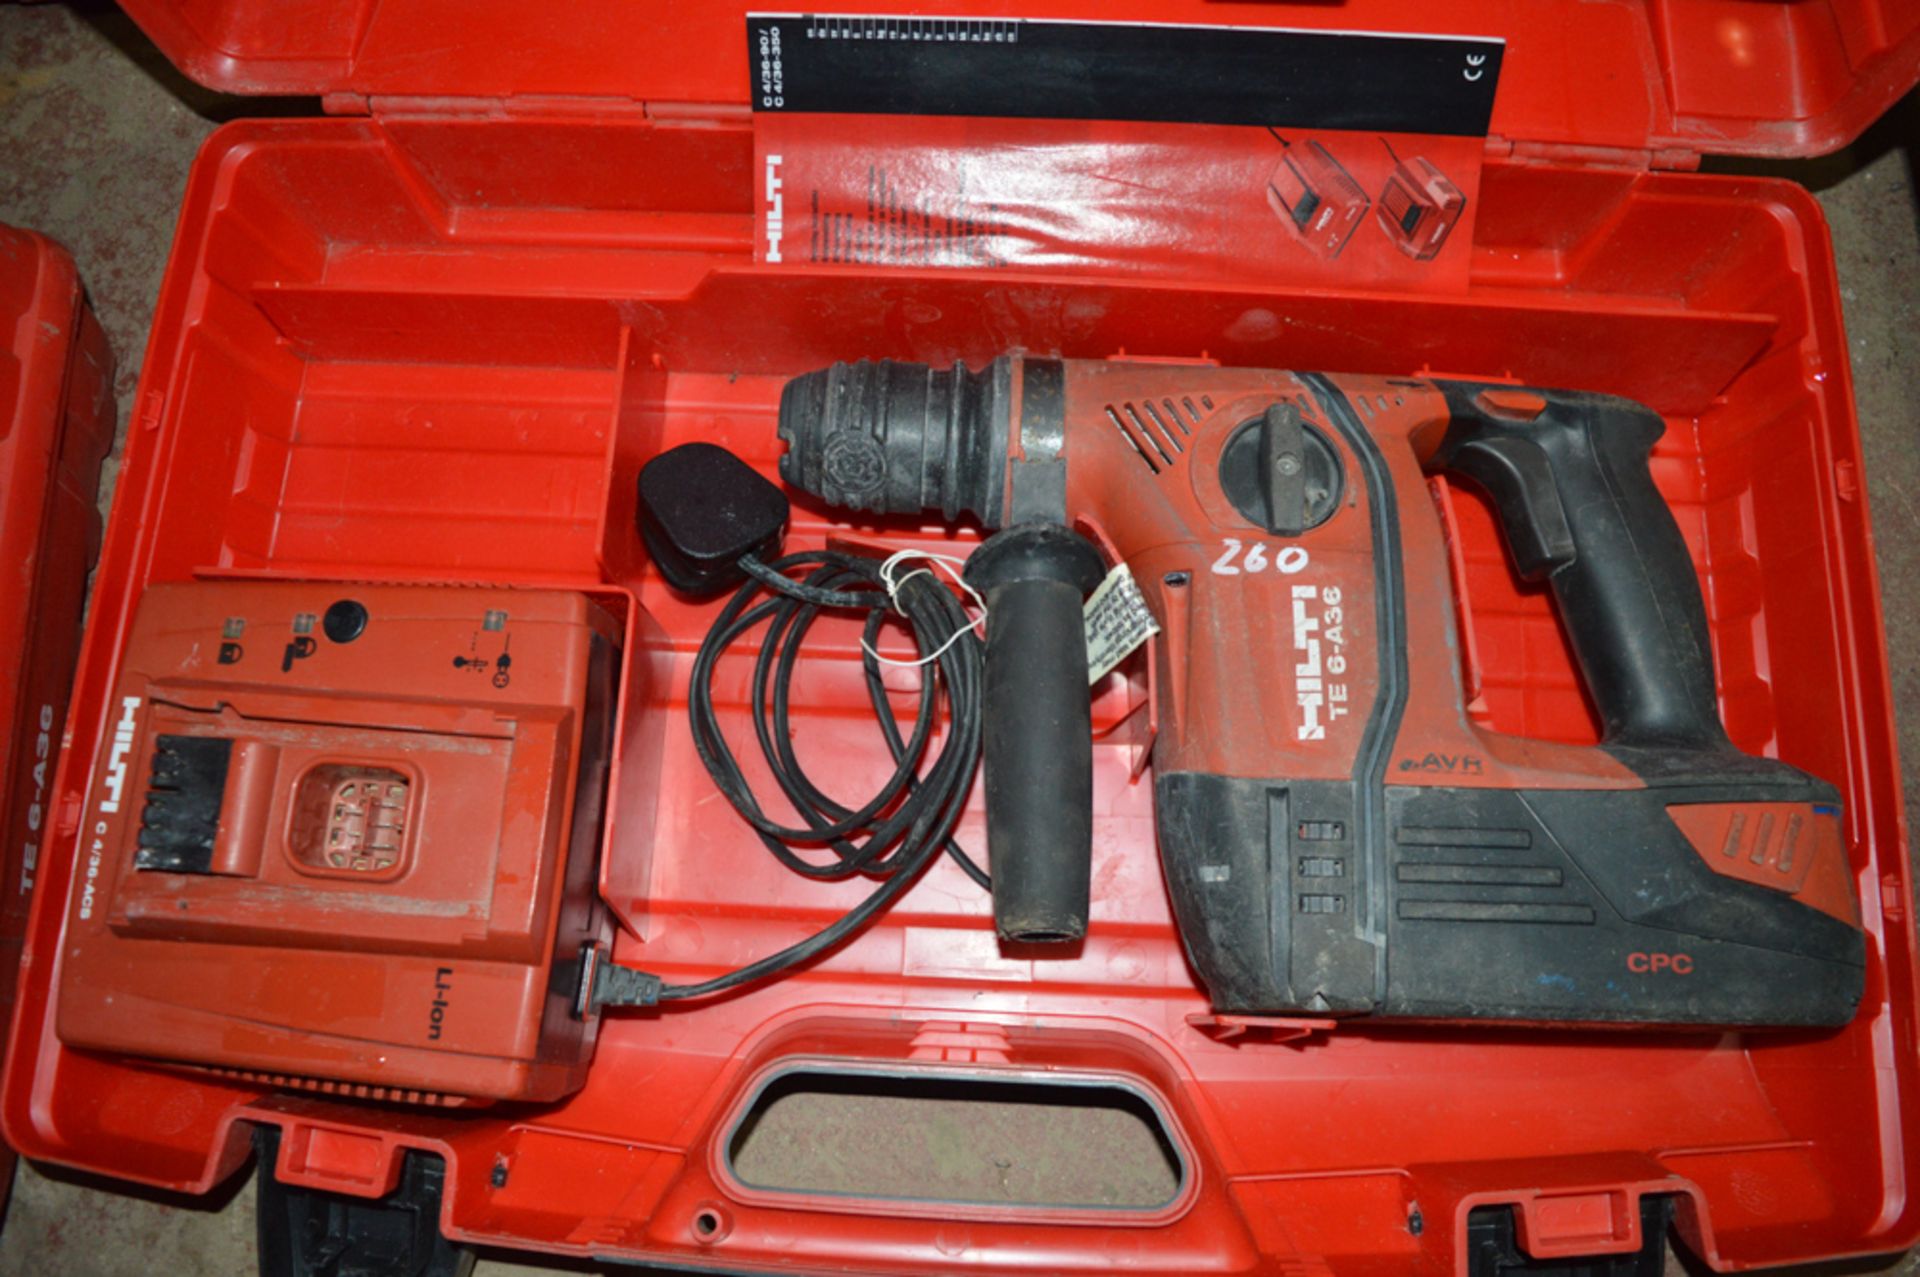 Hilti TE6-A36 cordless drill c/w battery charger & carry case BETE60590H